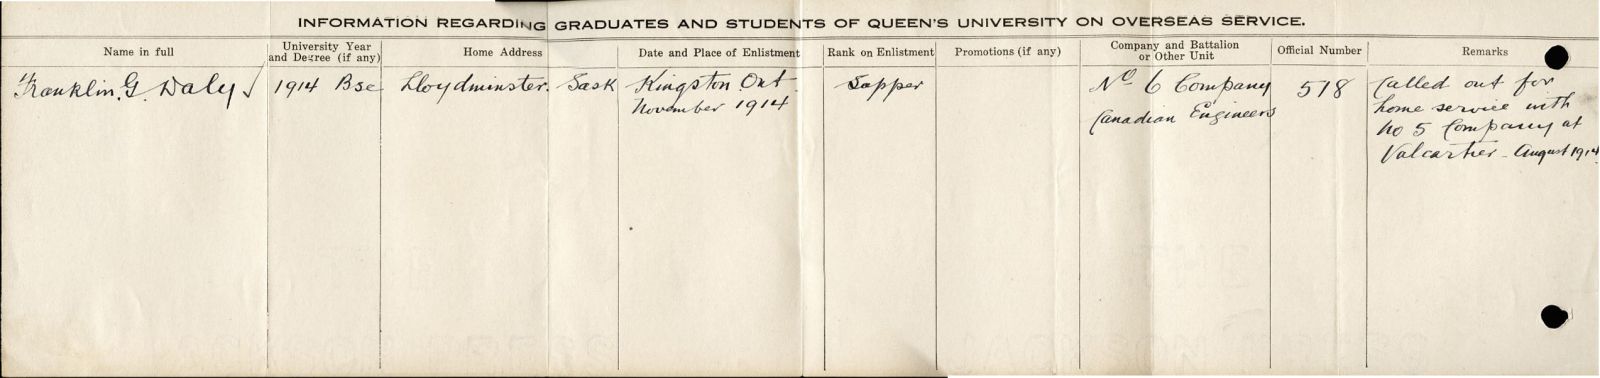 University Overseas Service Record of Daly